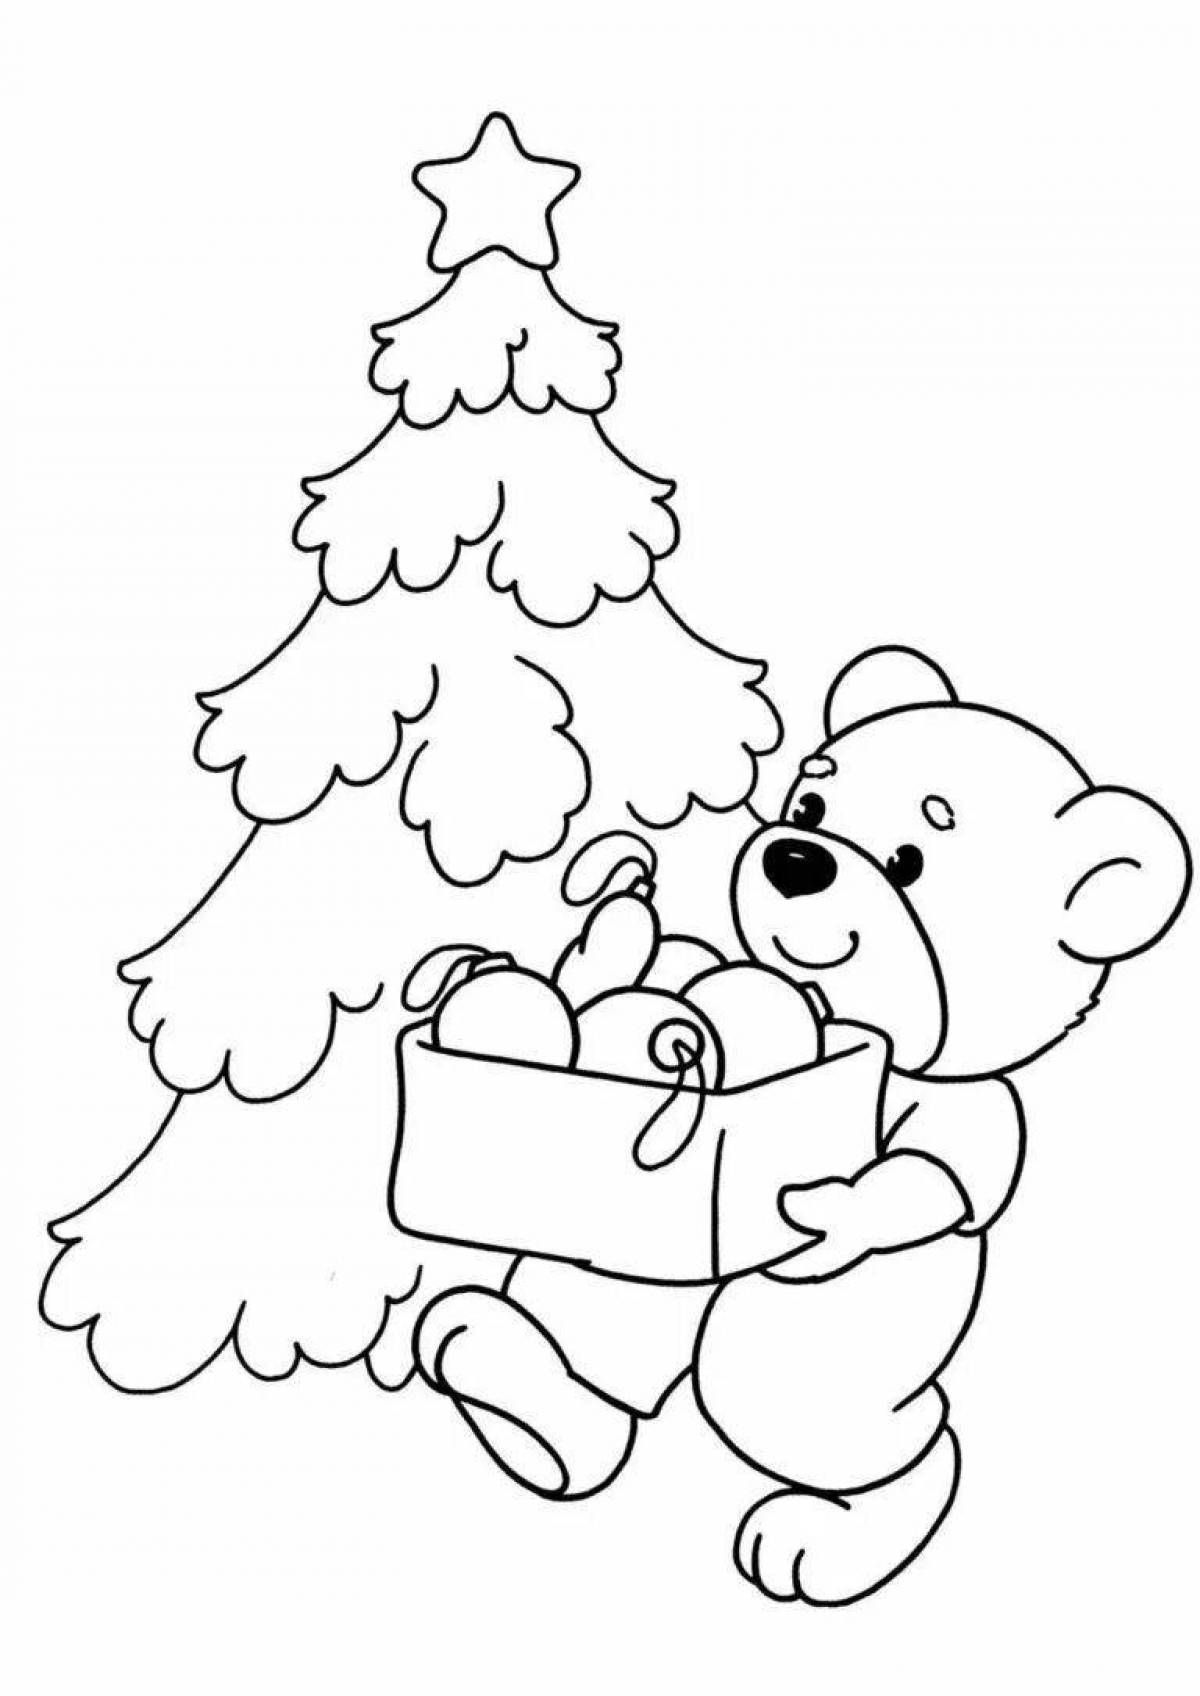 Merry Christmas tree and rabbit coloring book